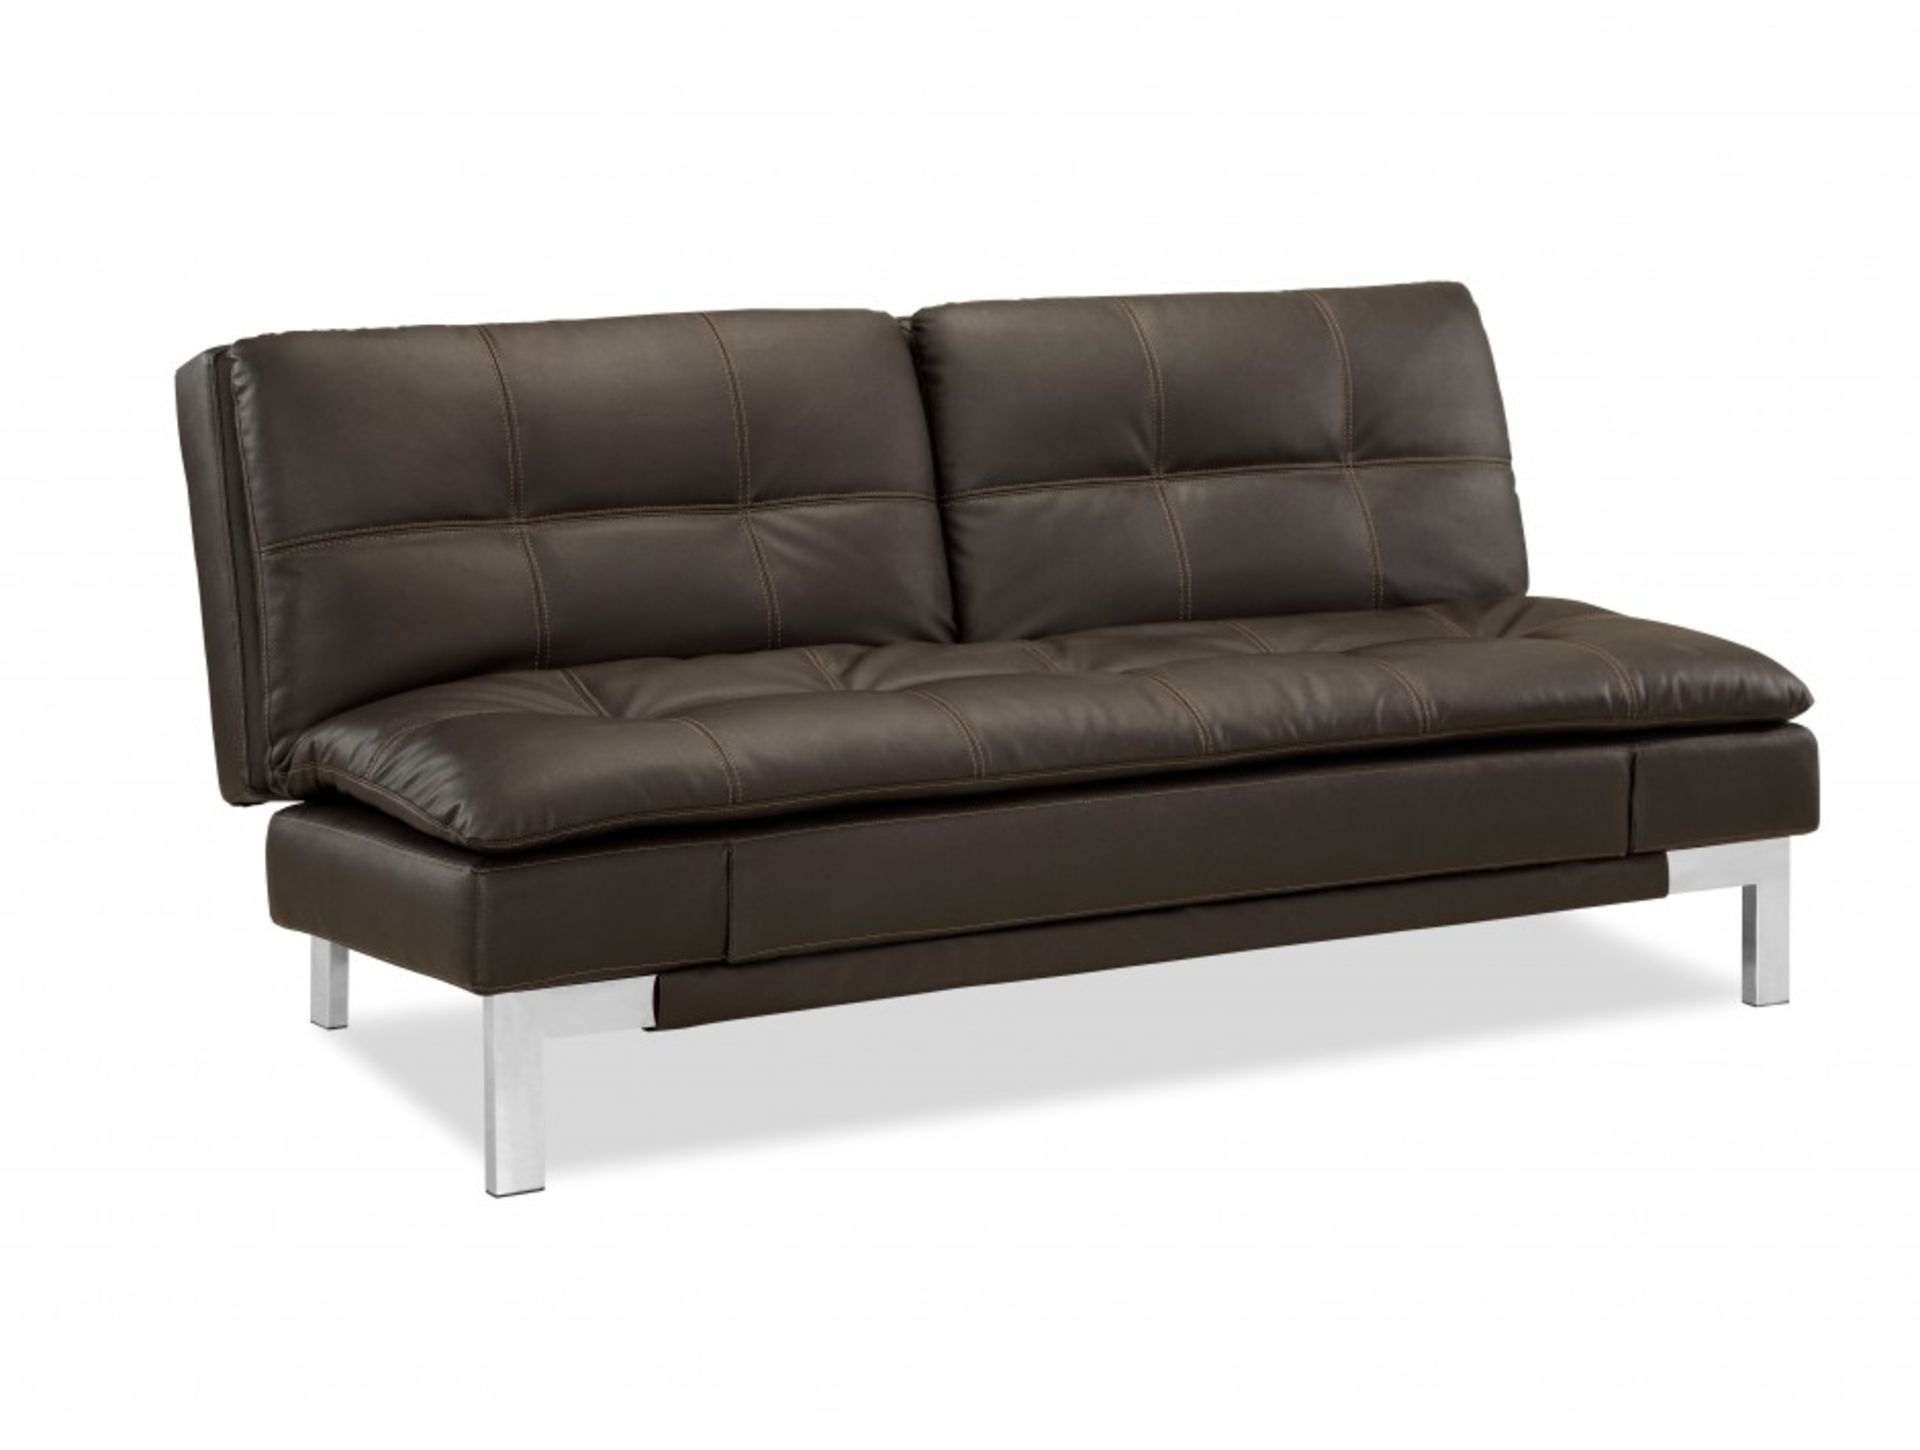 1 LIFESTYLE SOLUTIONS DARK BROWN BONDED EURO LOUNGER RRP Â£399 (GENERIC IMAGE GUIDE)